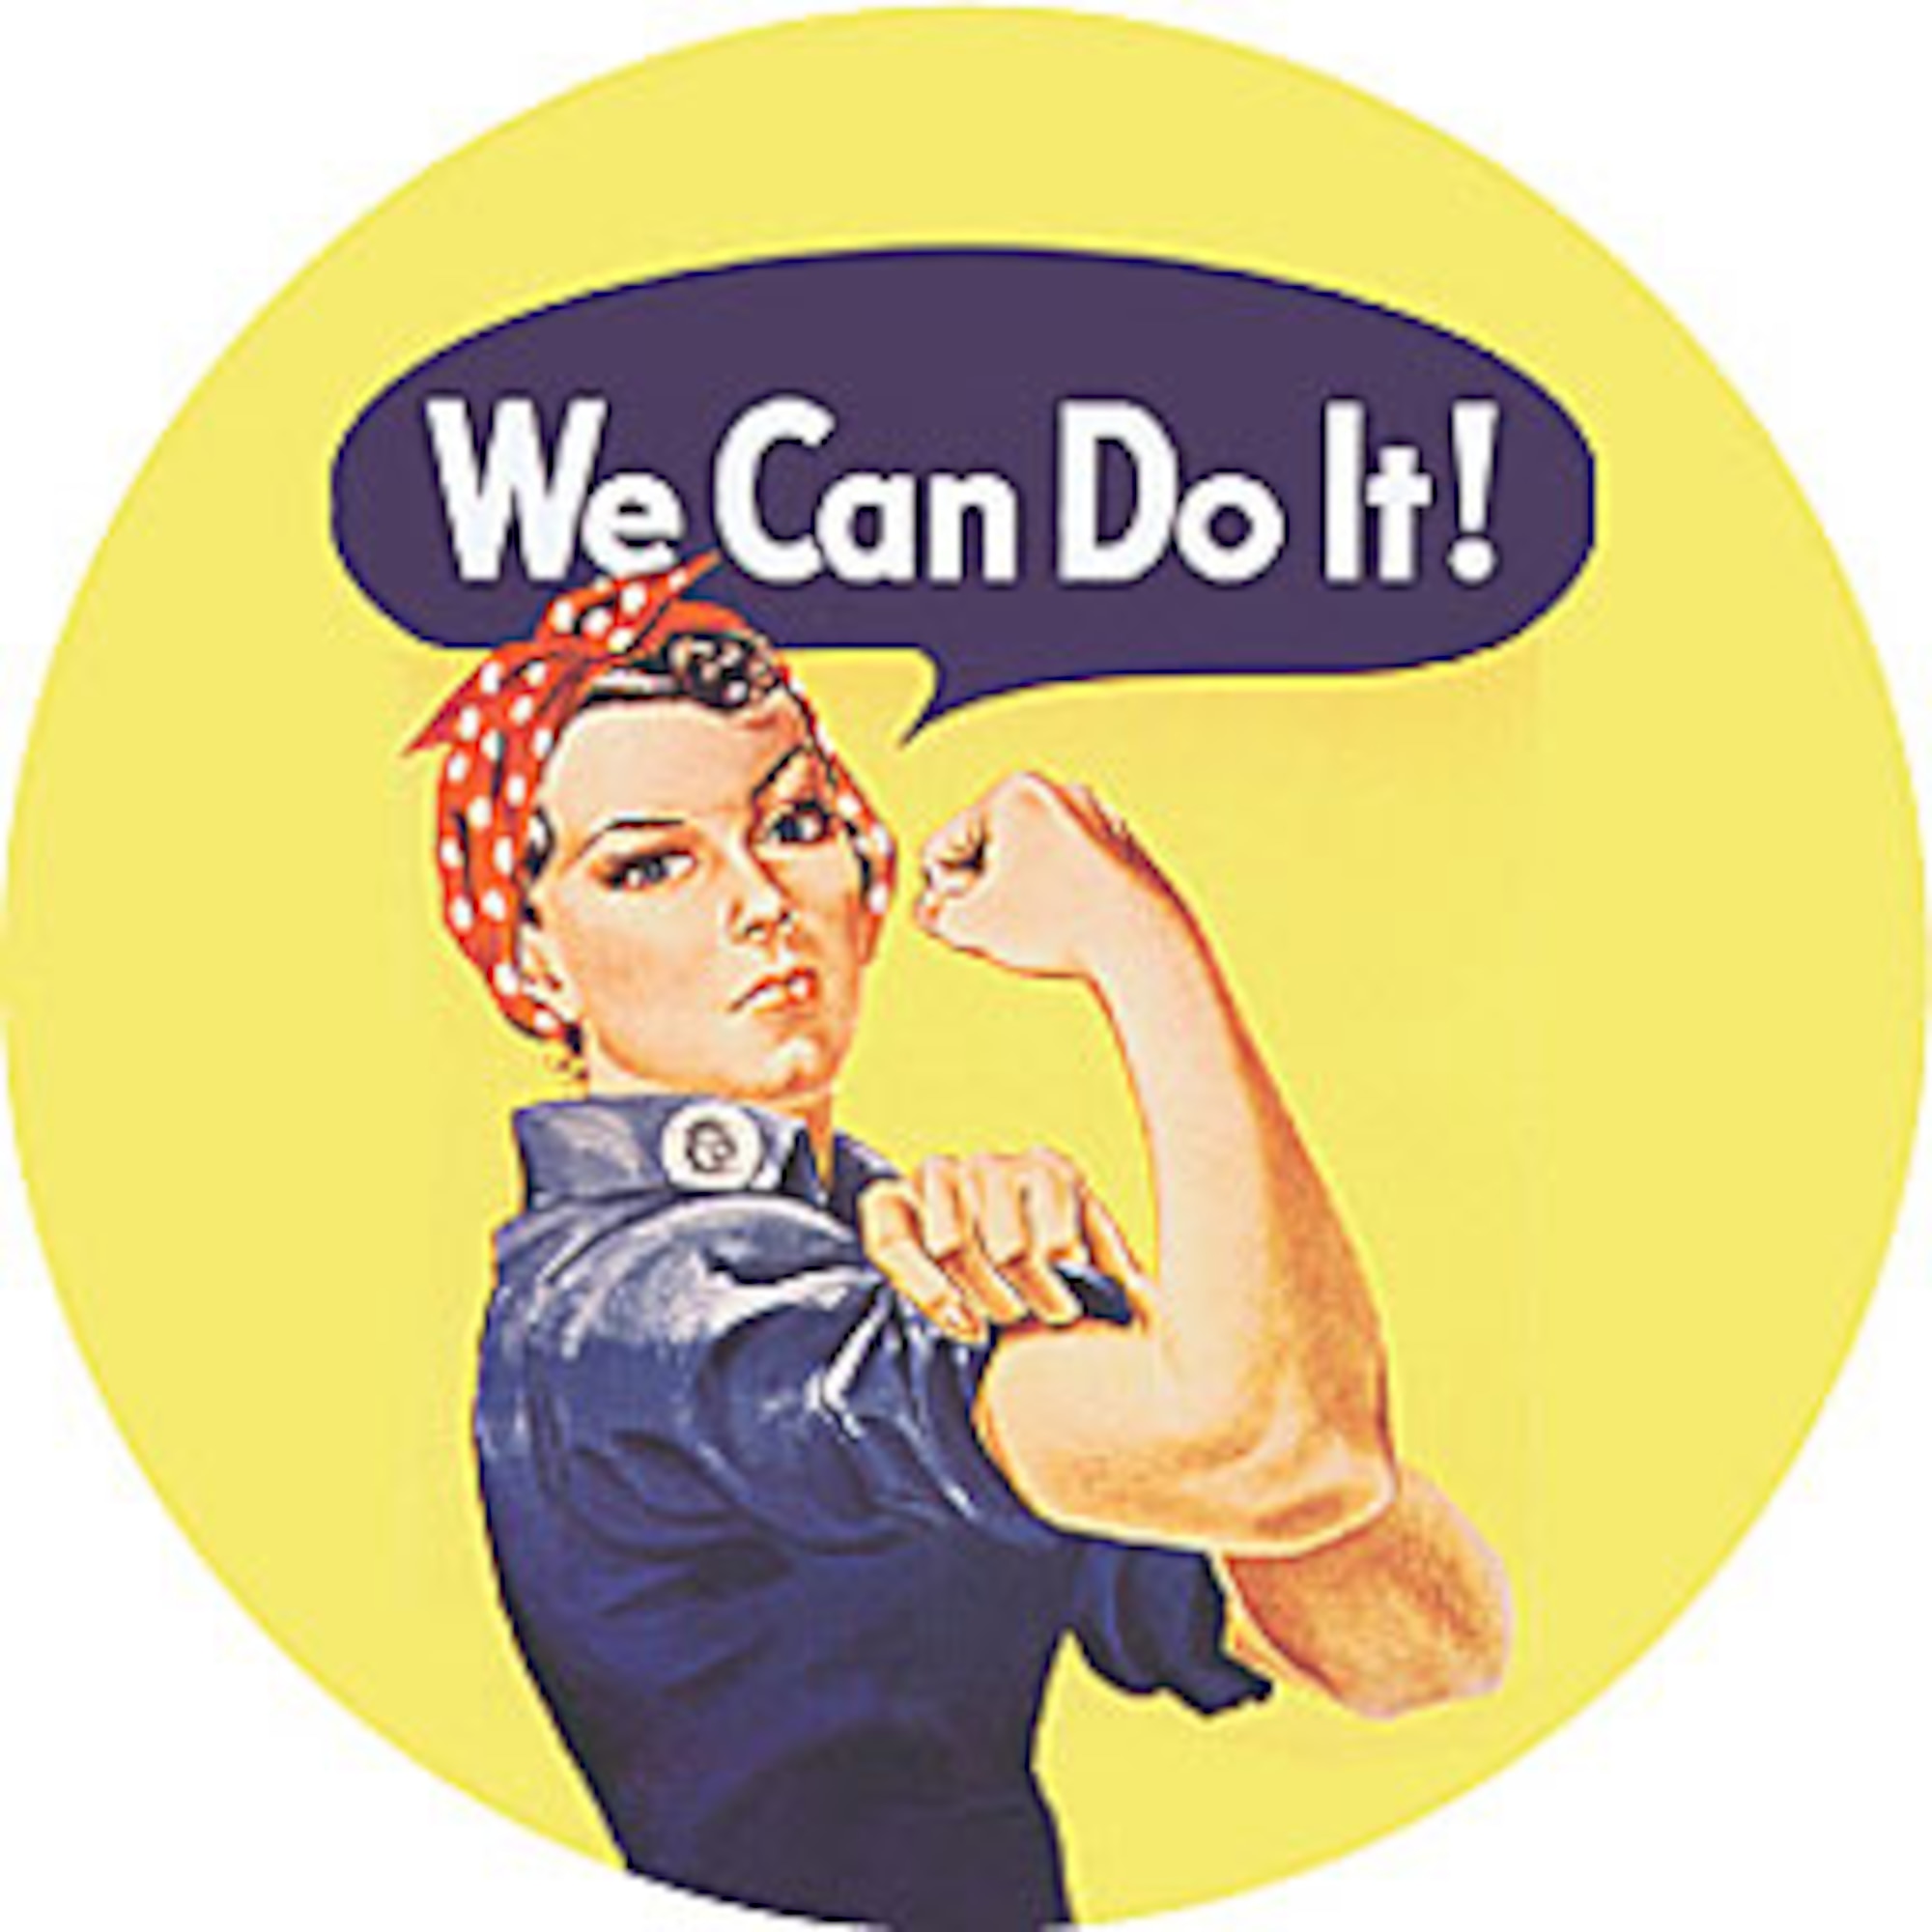 We can fun. Плакат «we can do it! ». Плакаты в стиле we can do it. Женщина we can do it. Плакат феминистка we can do it.